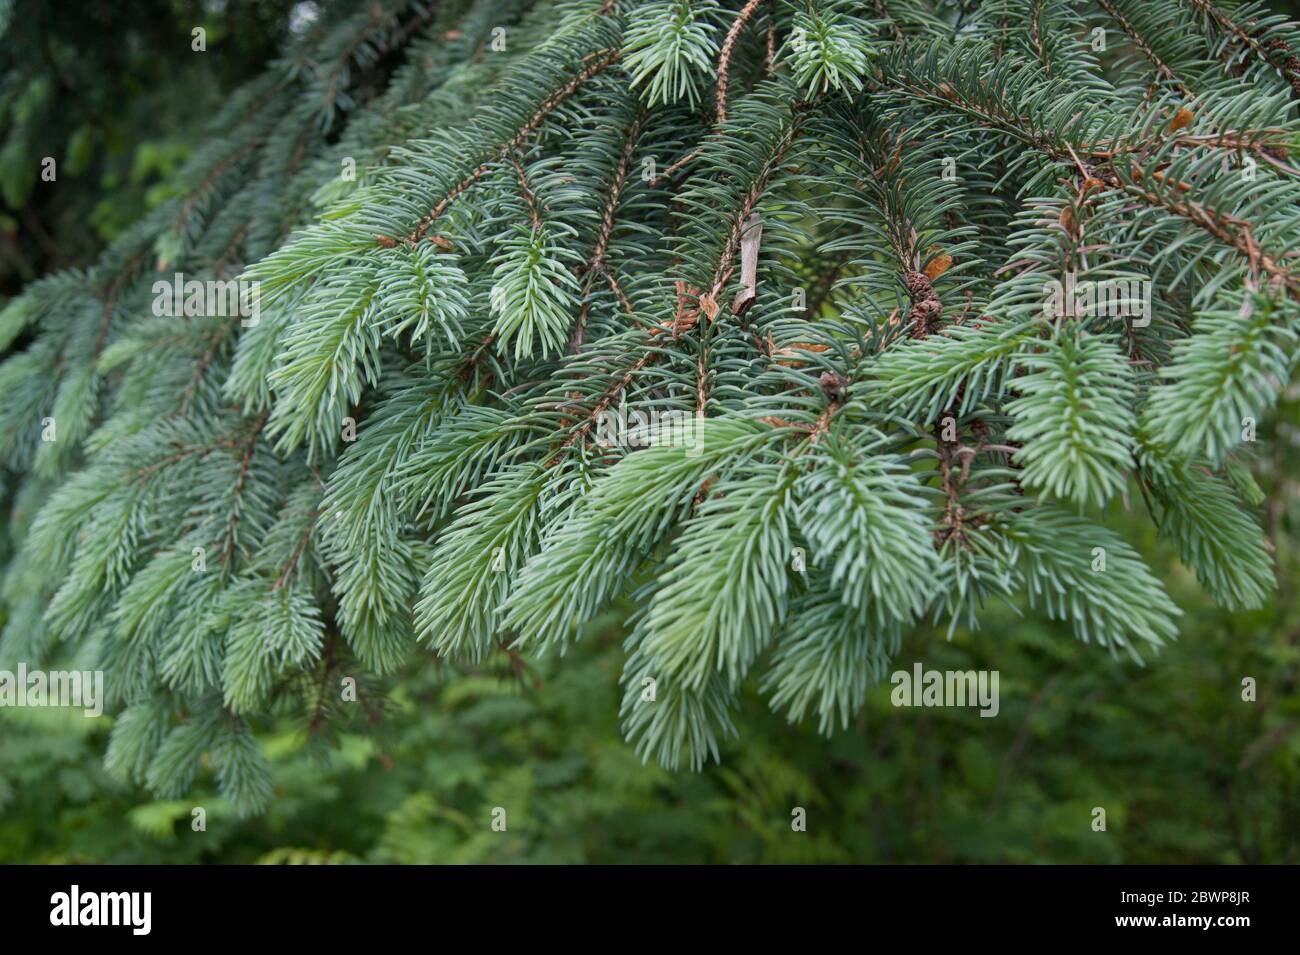 Picea abies European or Norway spruce Stock Photo